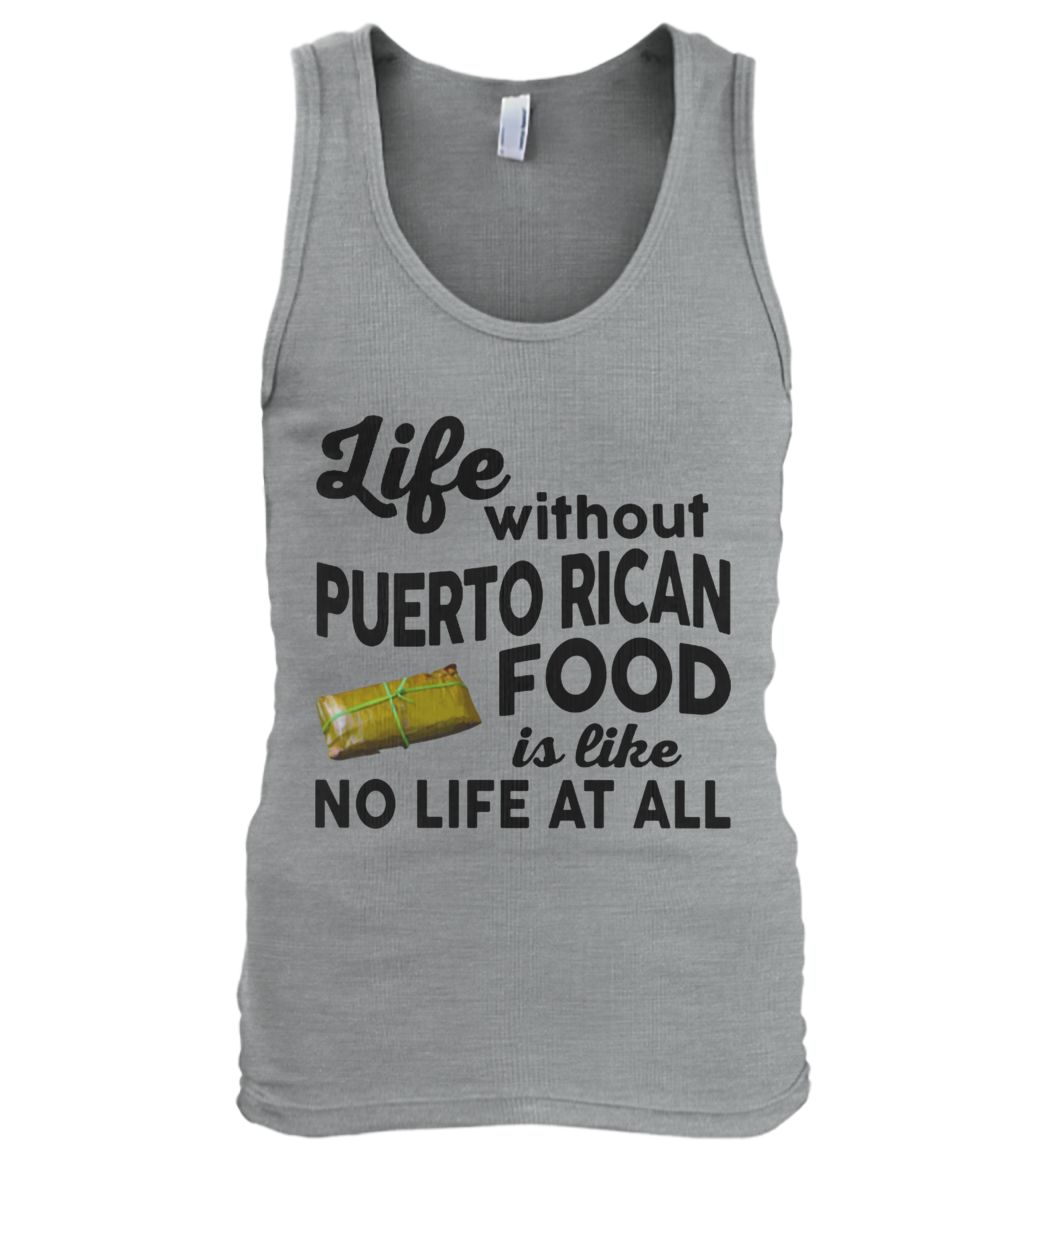 Life without puerto rican food is like no life at all men's tank top